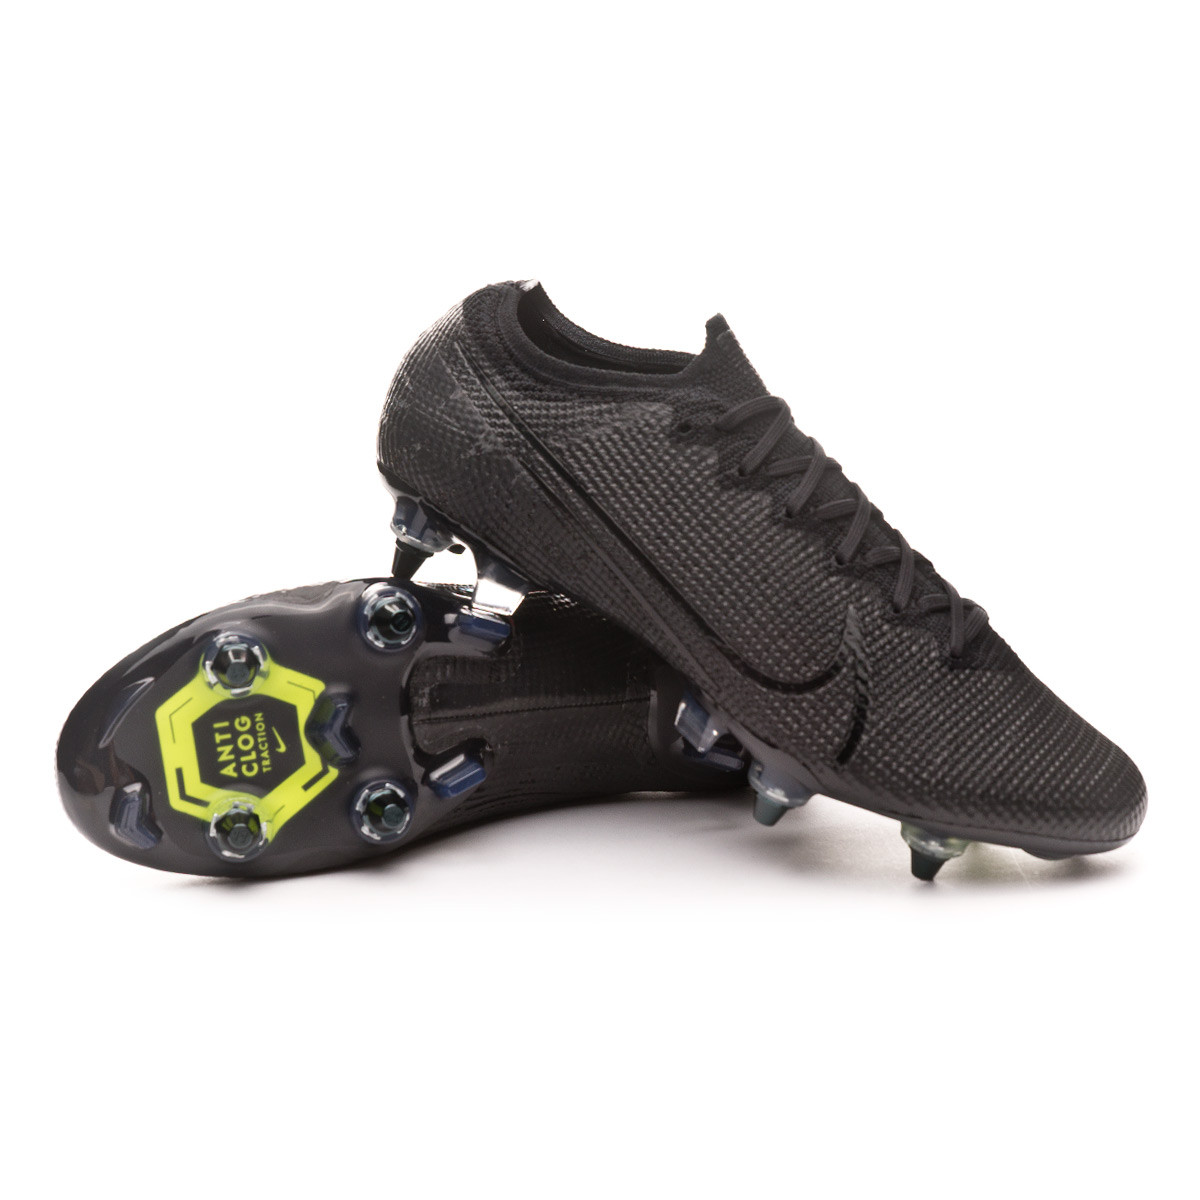 Nike Mercurial Vapor 13 Elite Leather Tech Craft Pack Review.